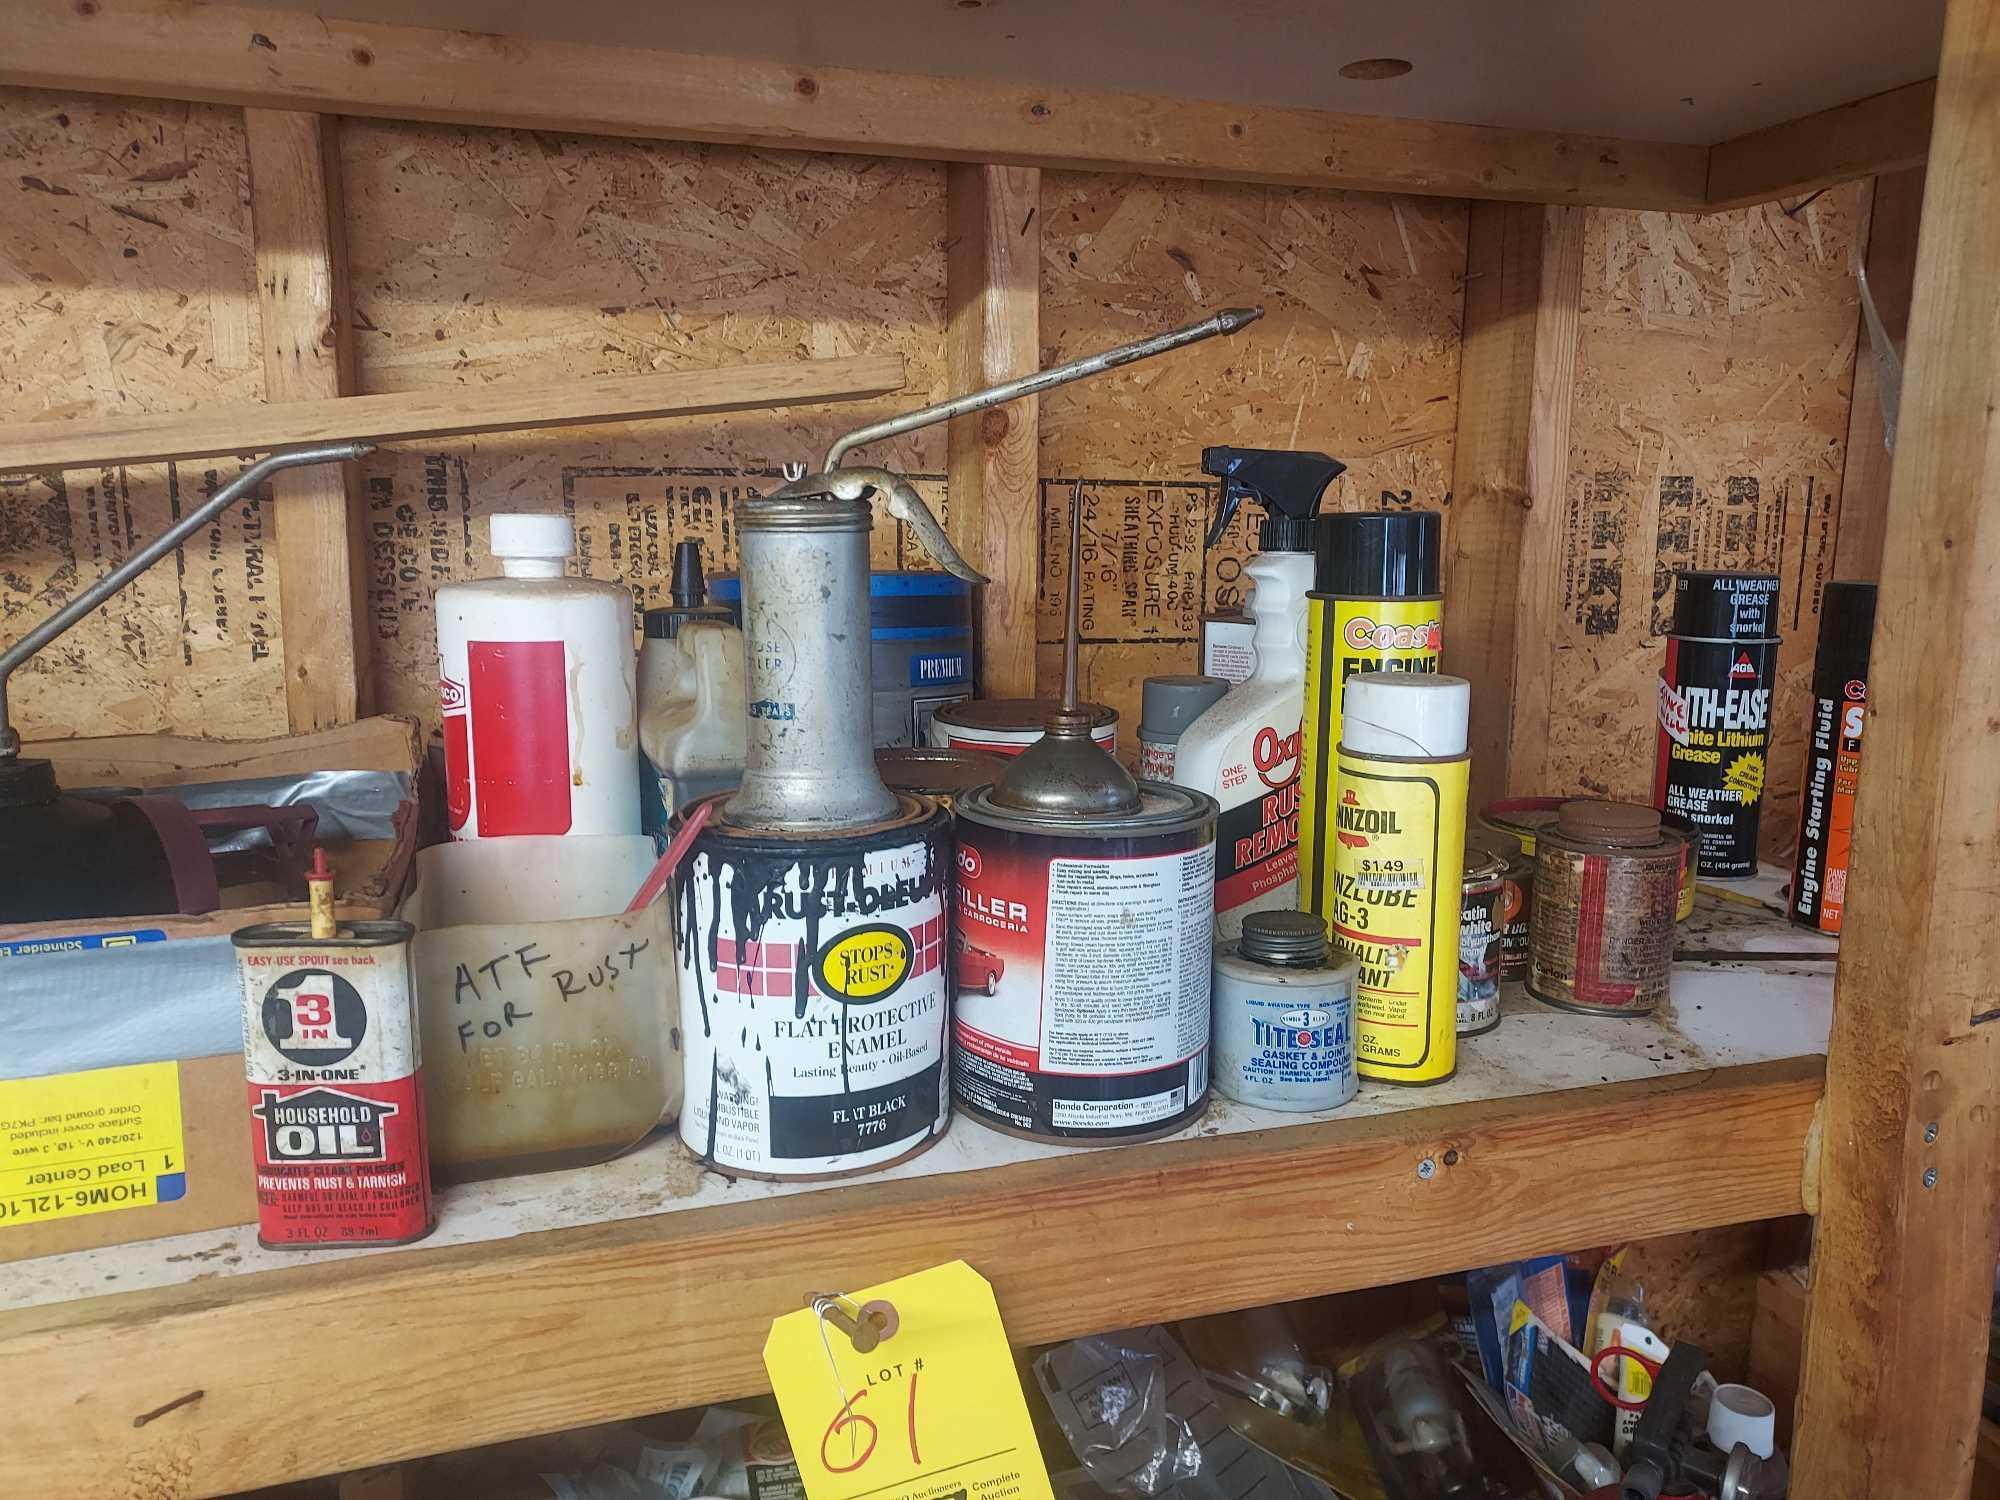 Wooden Shelving Section Contents - Oils, Sprays, Building Copper Wire, Tool Accessories, & more